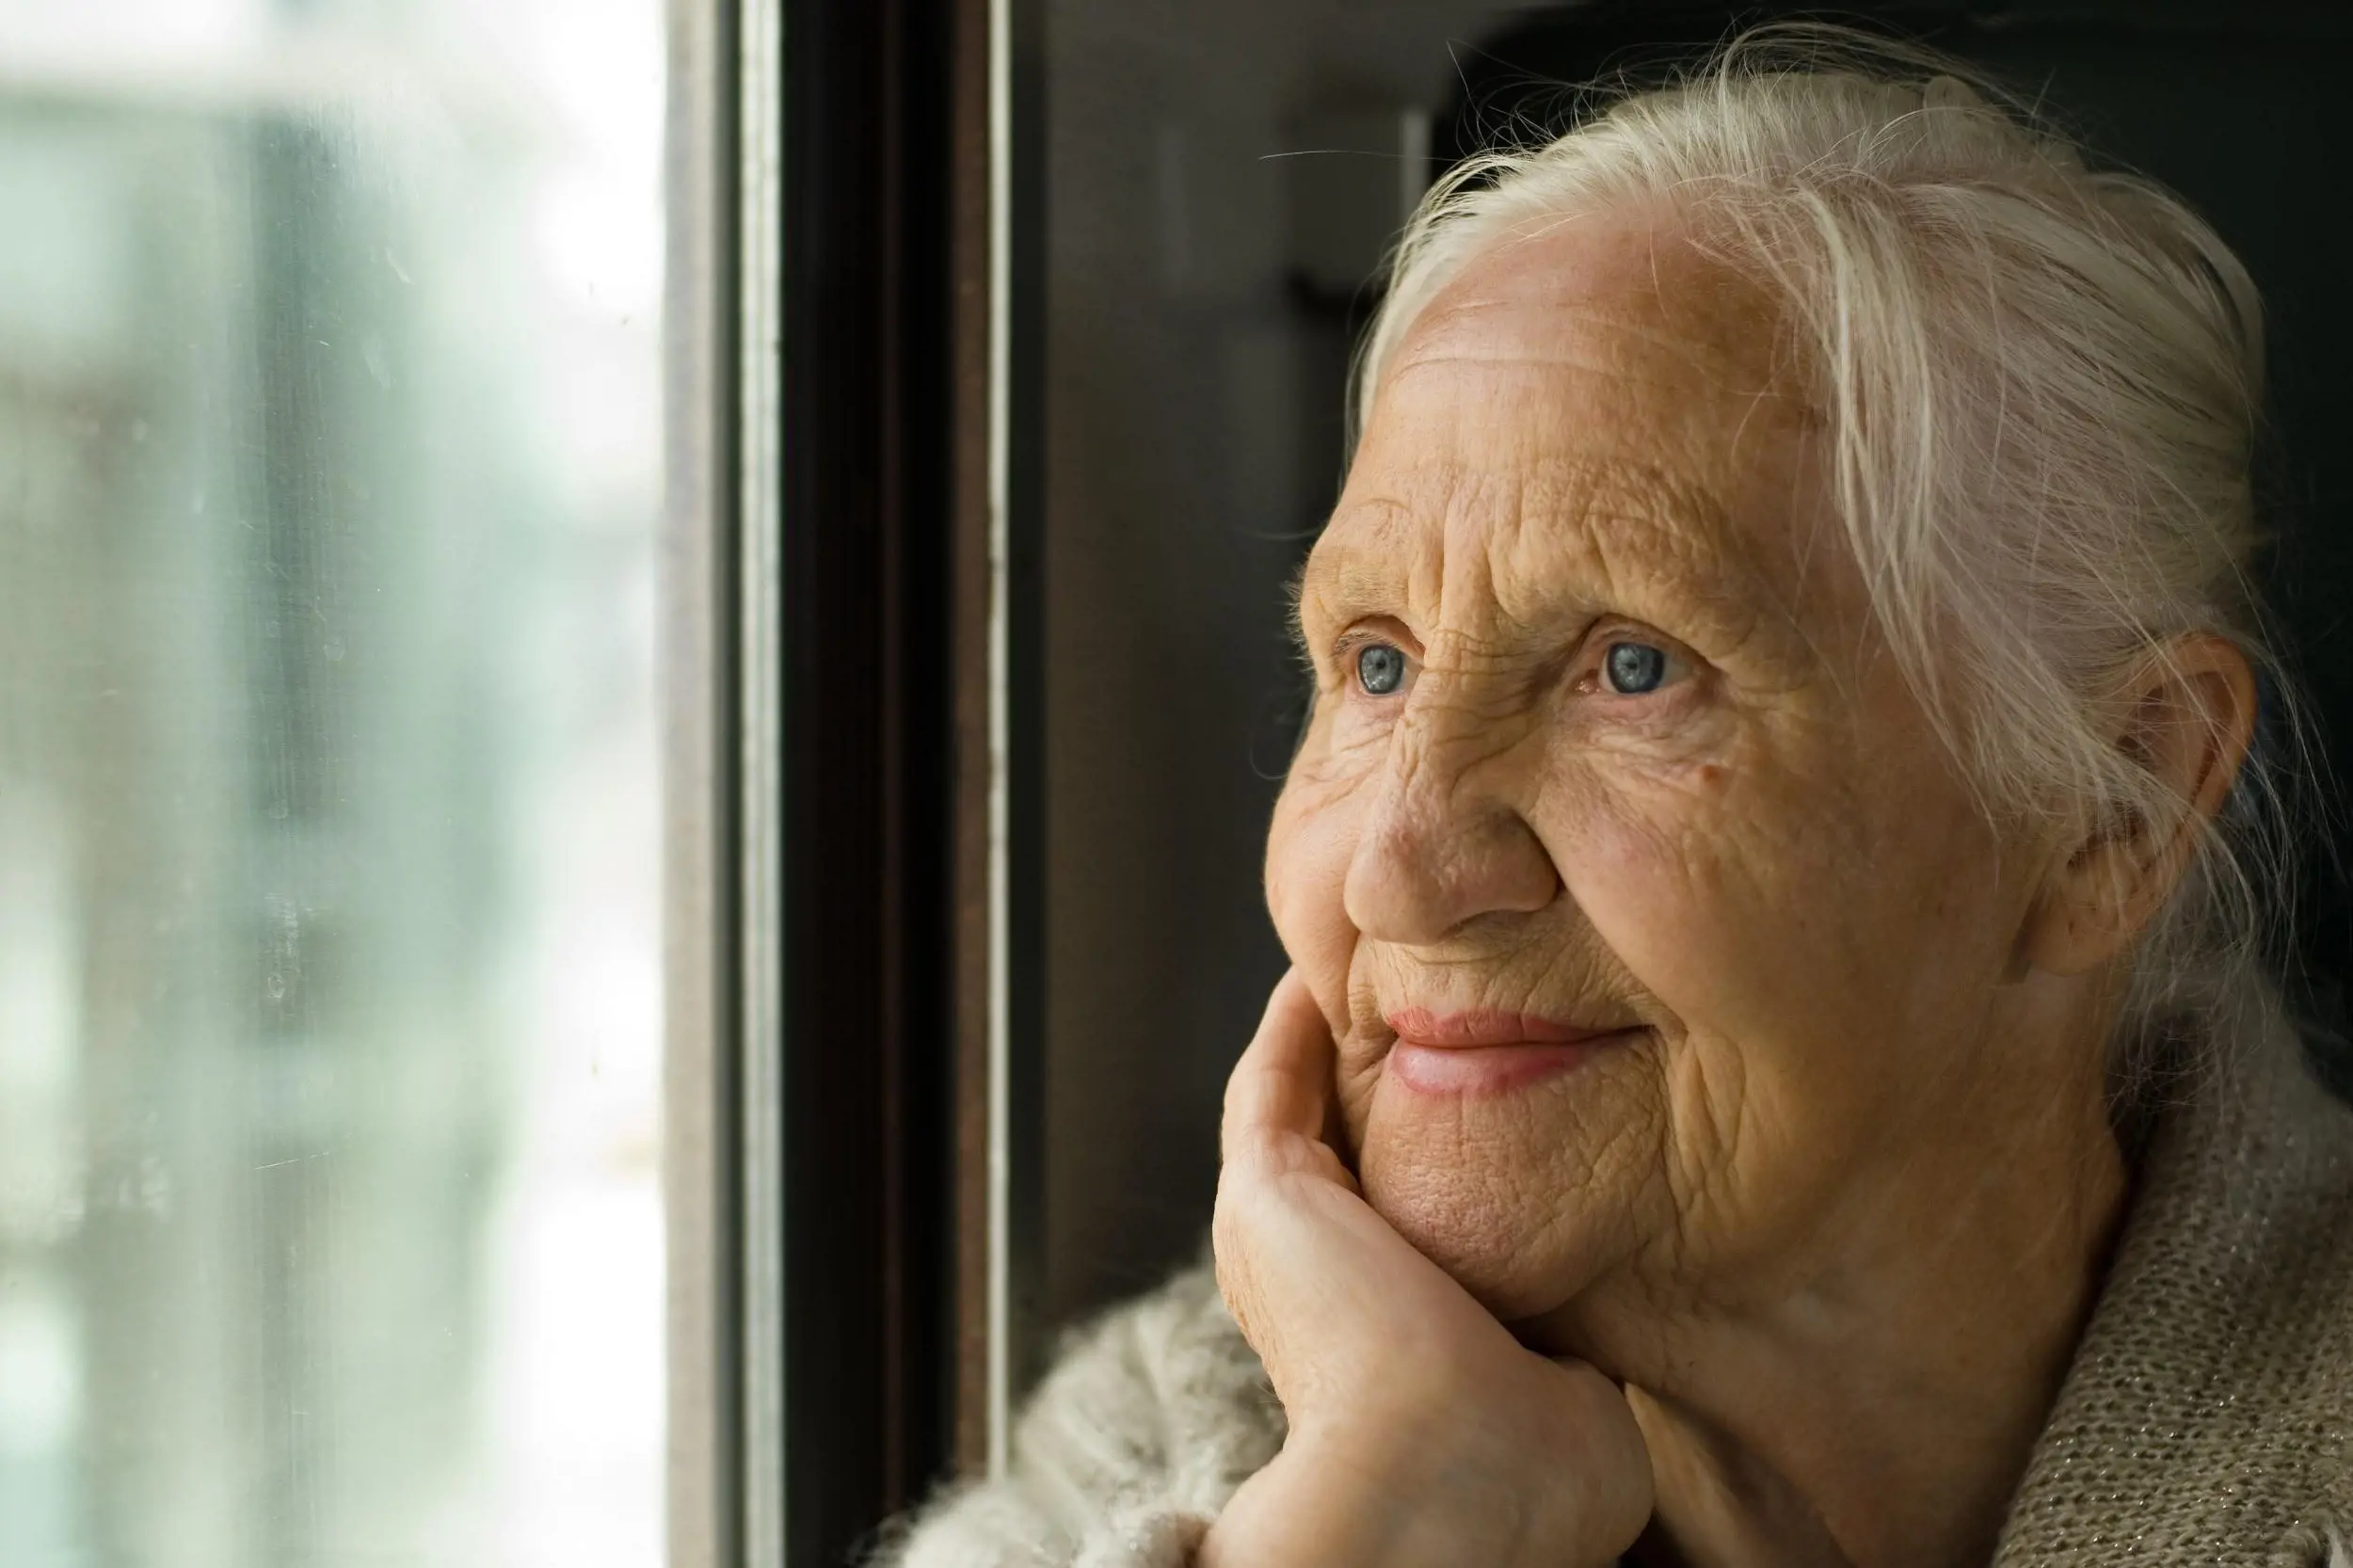 Elderly woman looking out the window. Photo